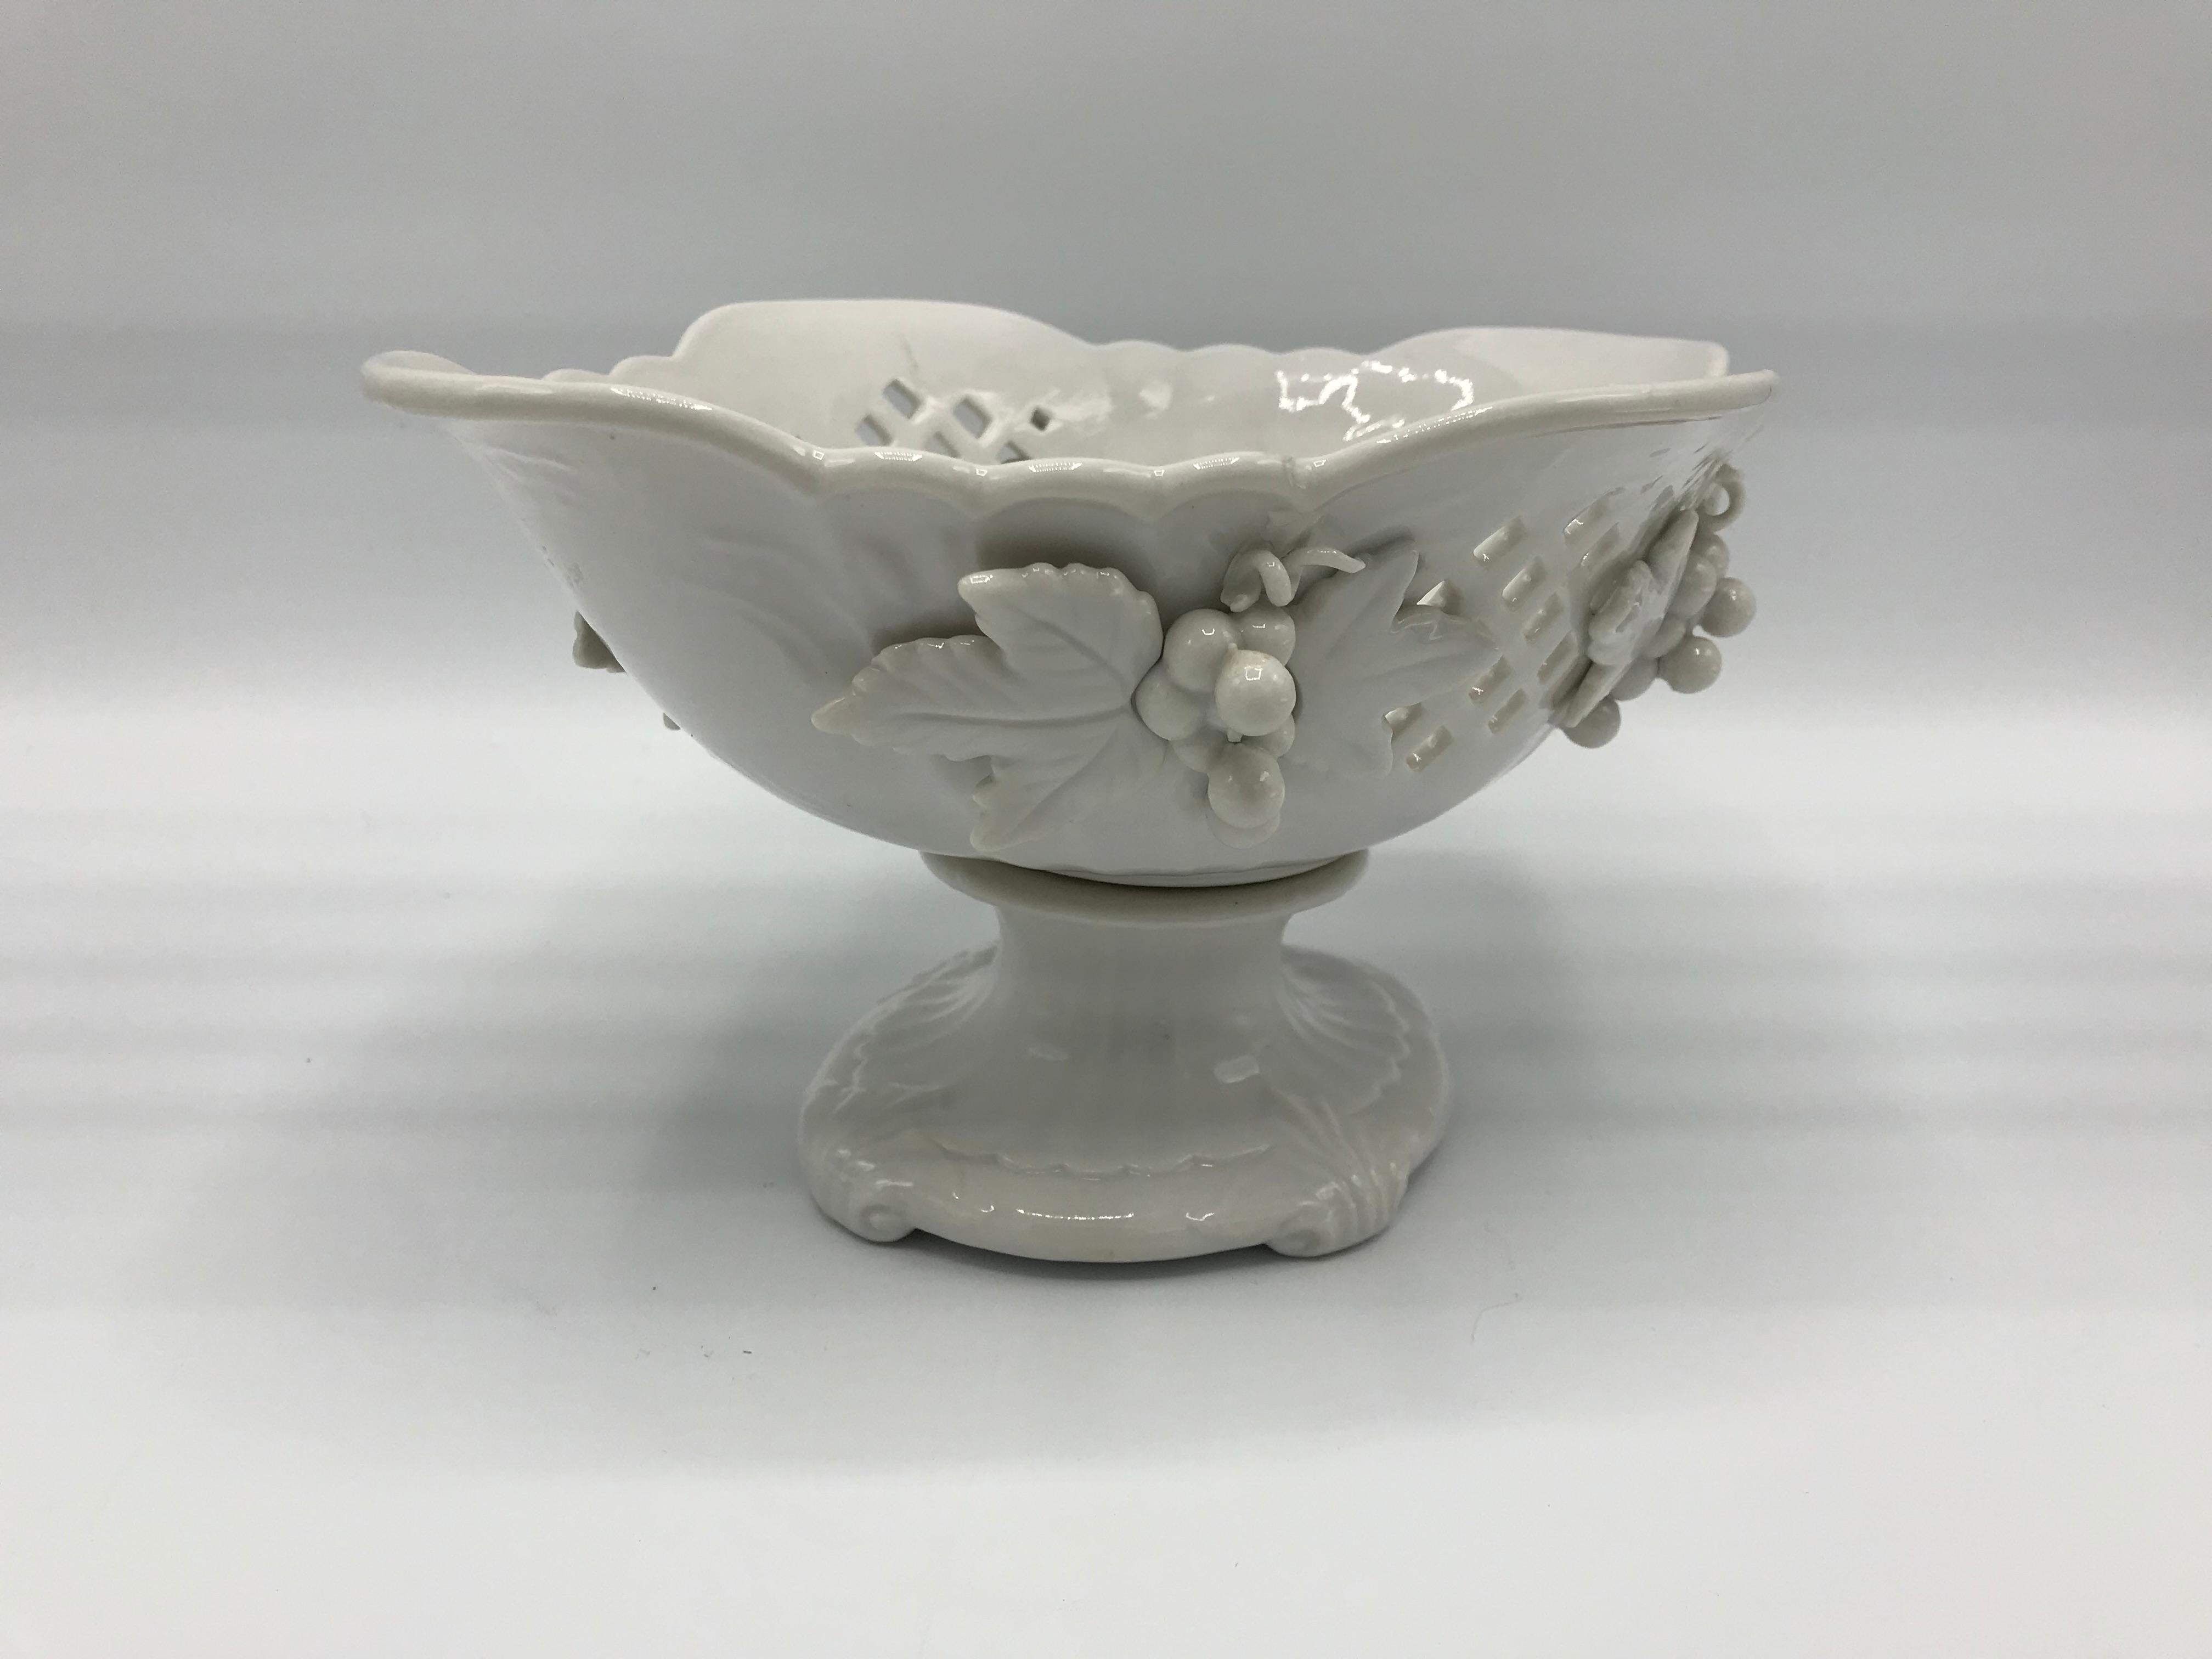 Offered is a stunning, 1960s Blanc de Chine porcelain compote bowl. The piece has a gorgeous pierced detailing on the two longer sides and a sculptural grape motif.